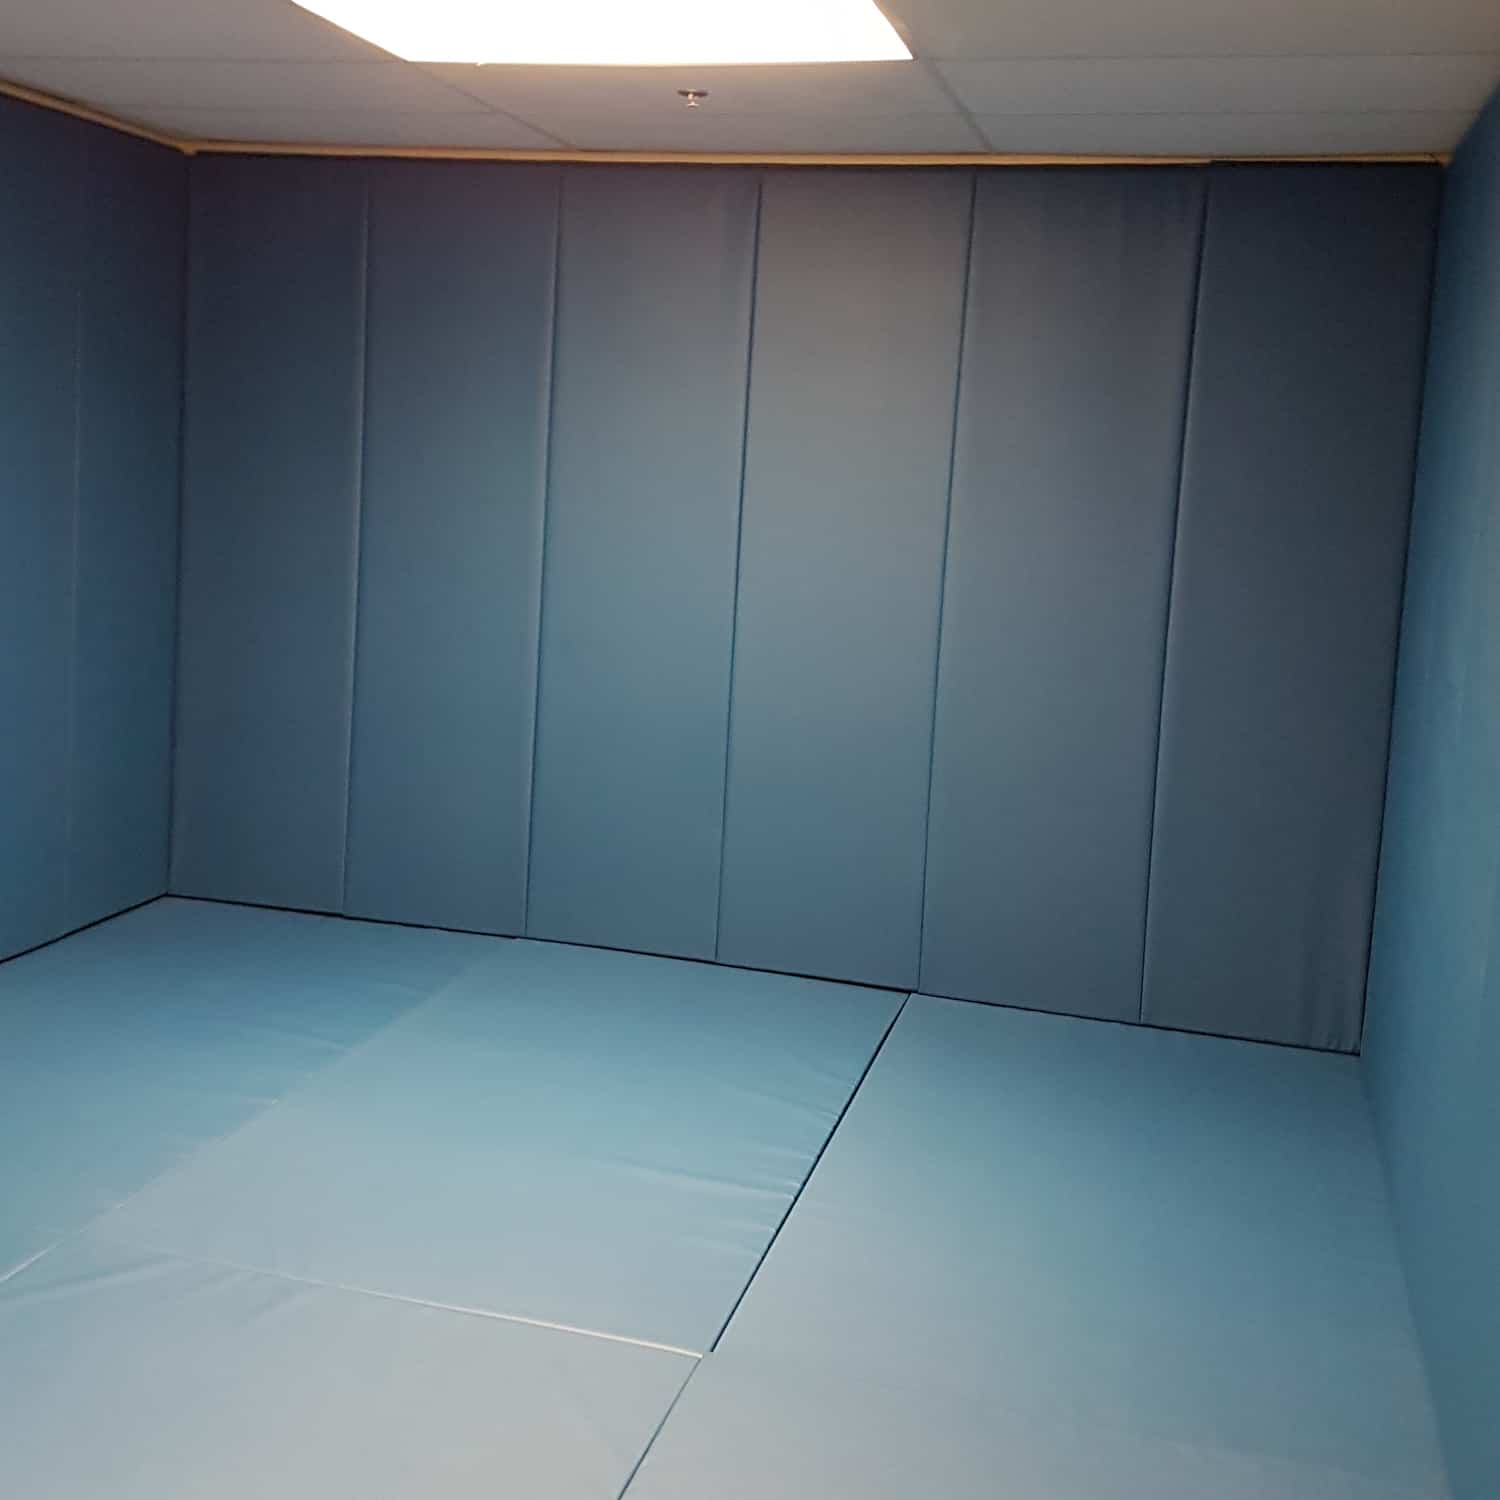 https://appleathletic.com/wp-content/uploads/2019/12/6-protective-padding-calming-rooms.jpg